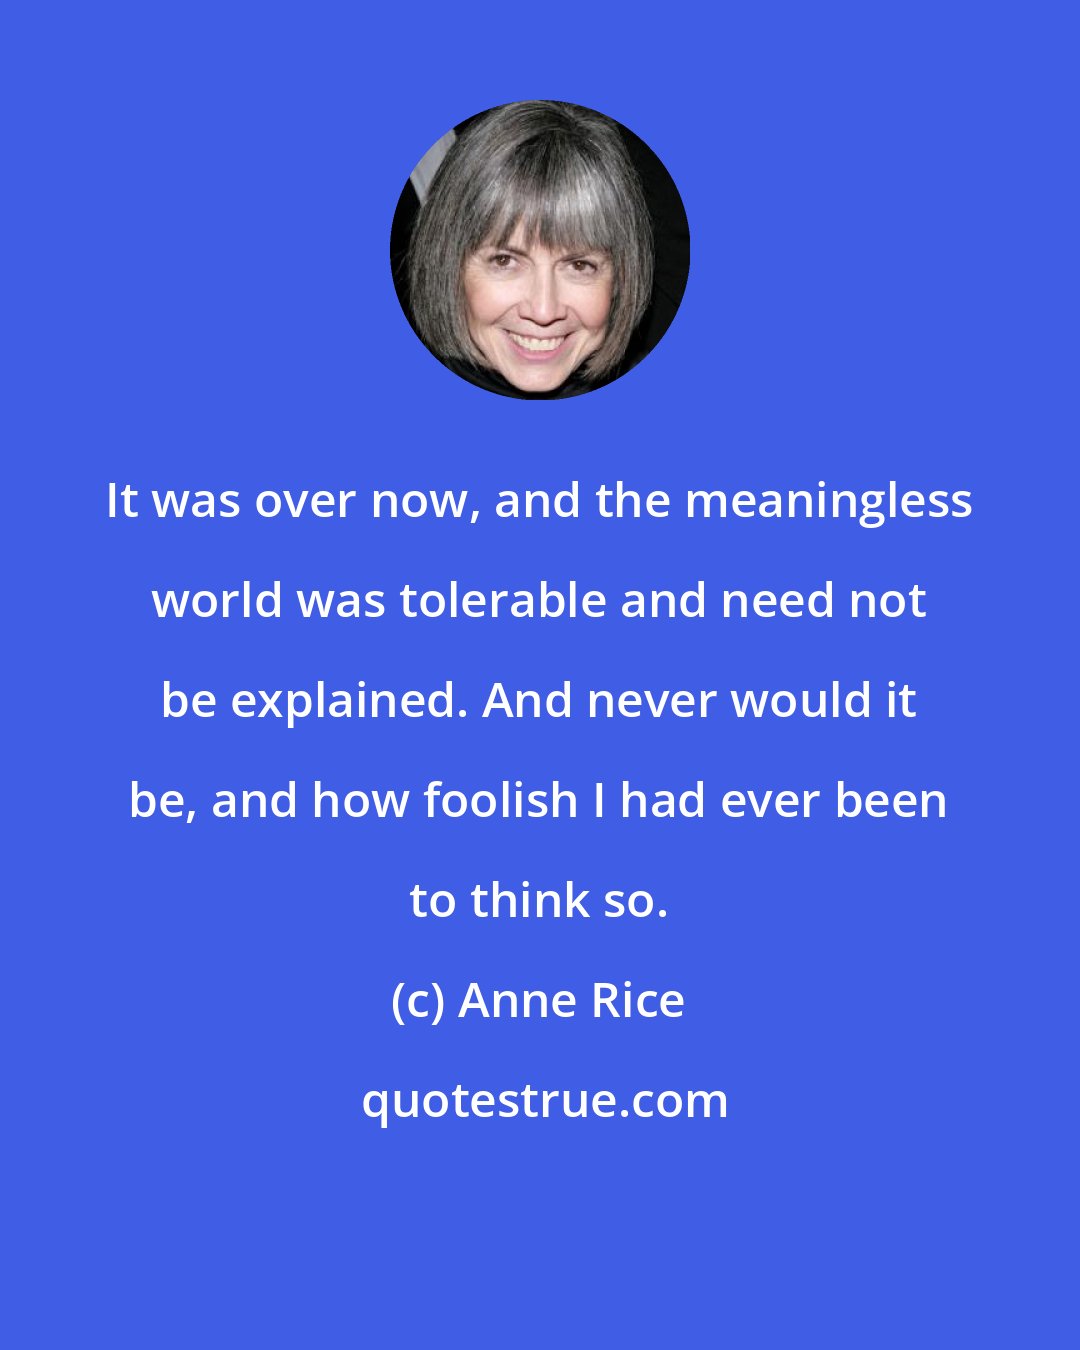 Anne Rice: It was over now, and the meaningless world was tolerable and need not be explained. And never would it be, and how foolish I had ever been to think so.